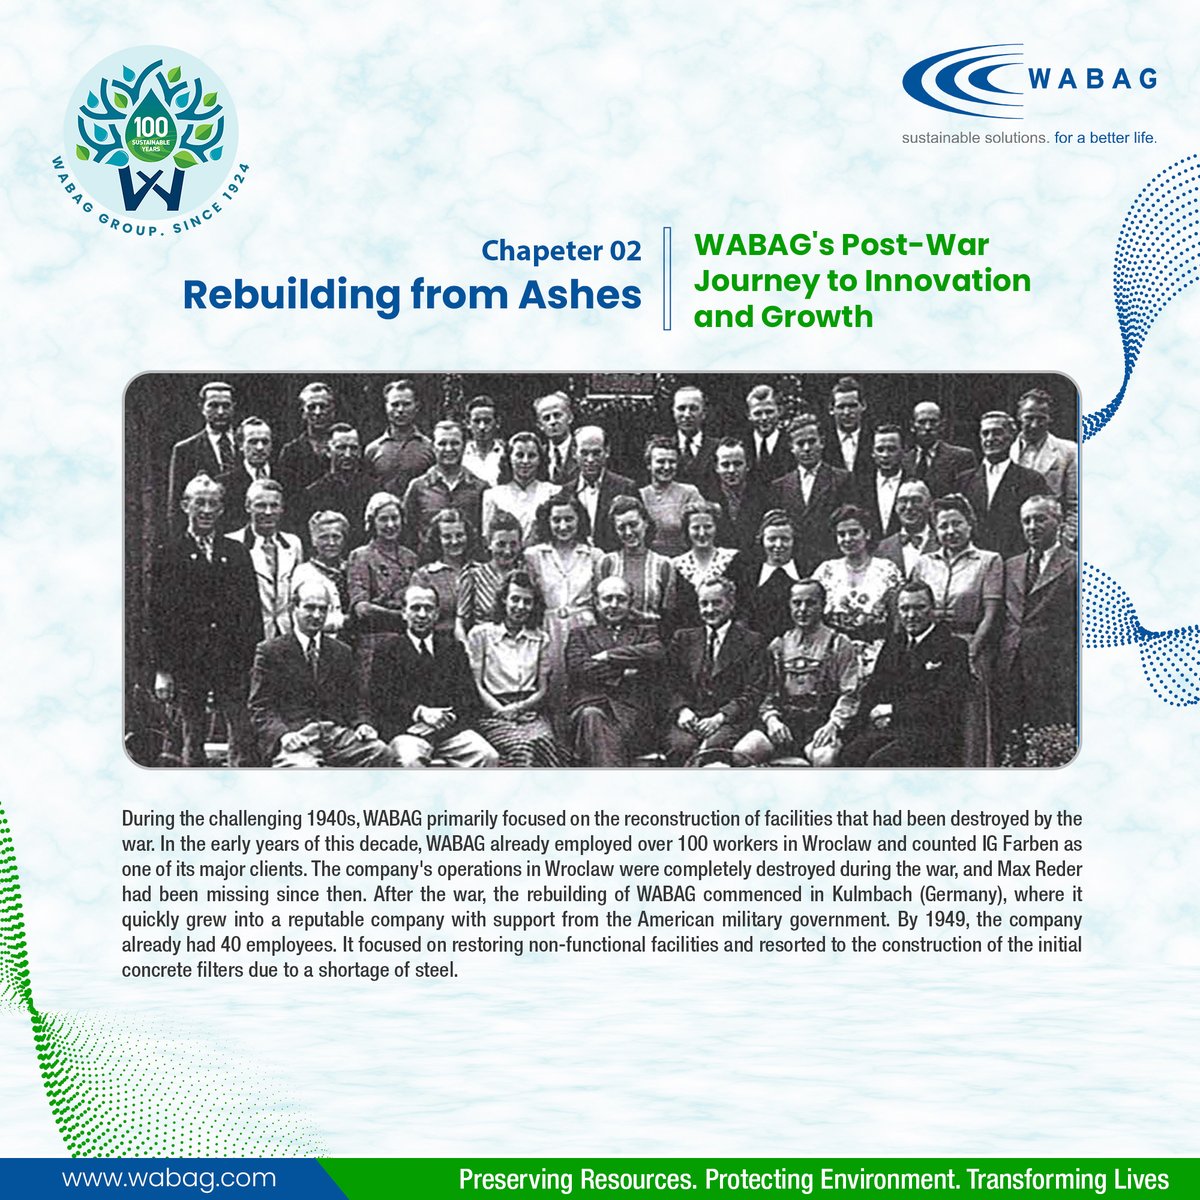 Ripples of Impact: The Chronicle of WABAG's Century in Water

Chapter 02: Rebuilding From Ashes
(WABAG’S Post-War Journey To Innovation & Growth)

#RipplesOfImpact #WABAGChronicle #MaxReder #Germany #IgFarben #Wroclaw #Kulmbach #SDG #ESG #WABAG #VATECHWABAG #WABAG100